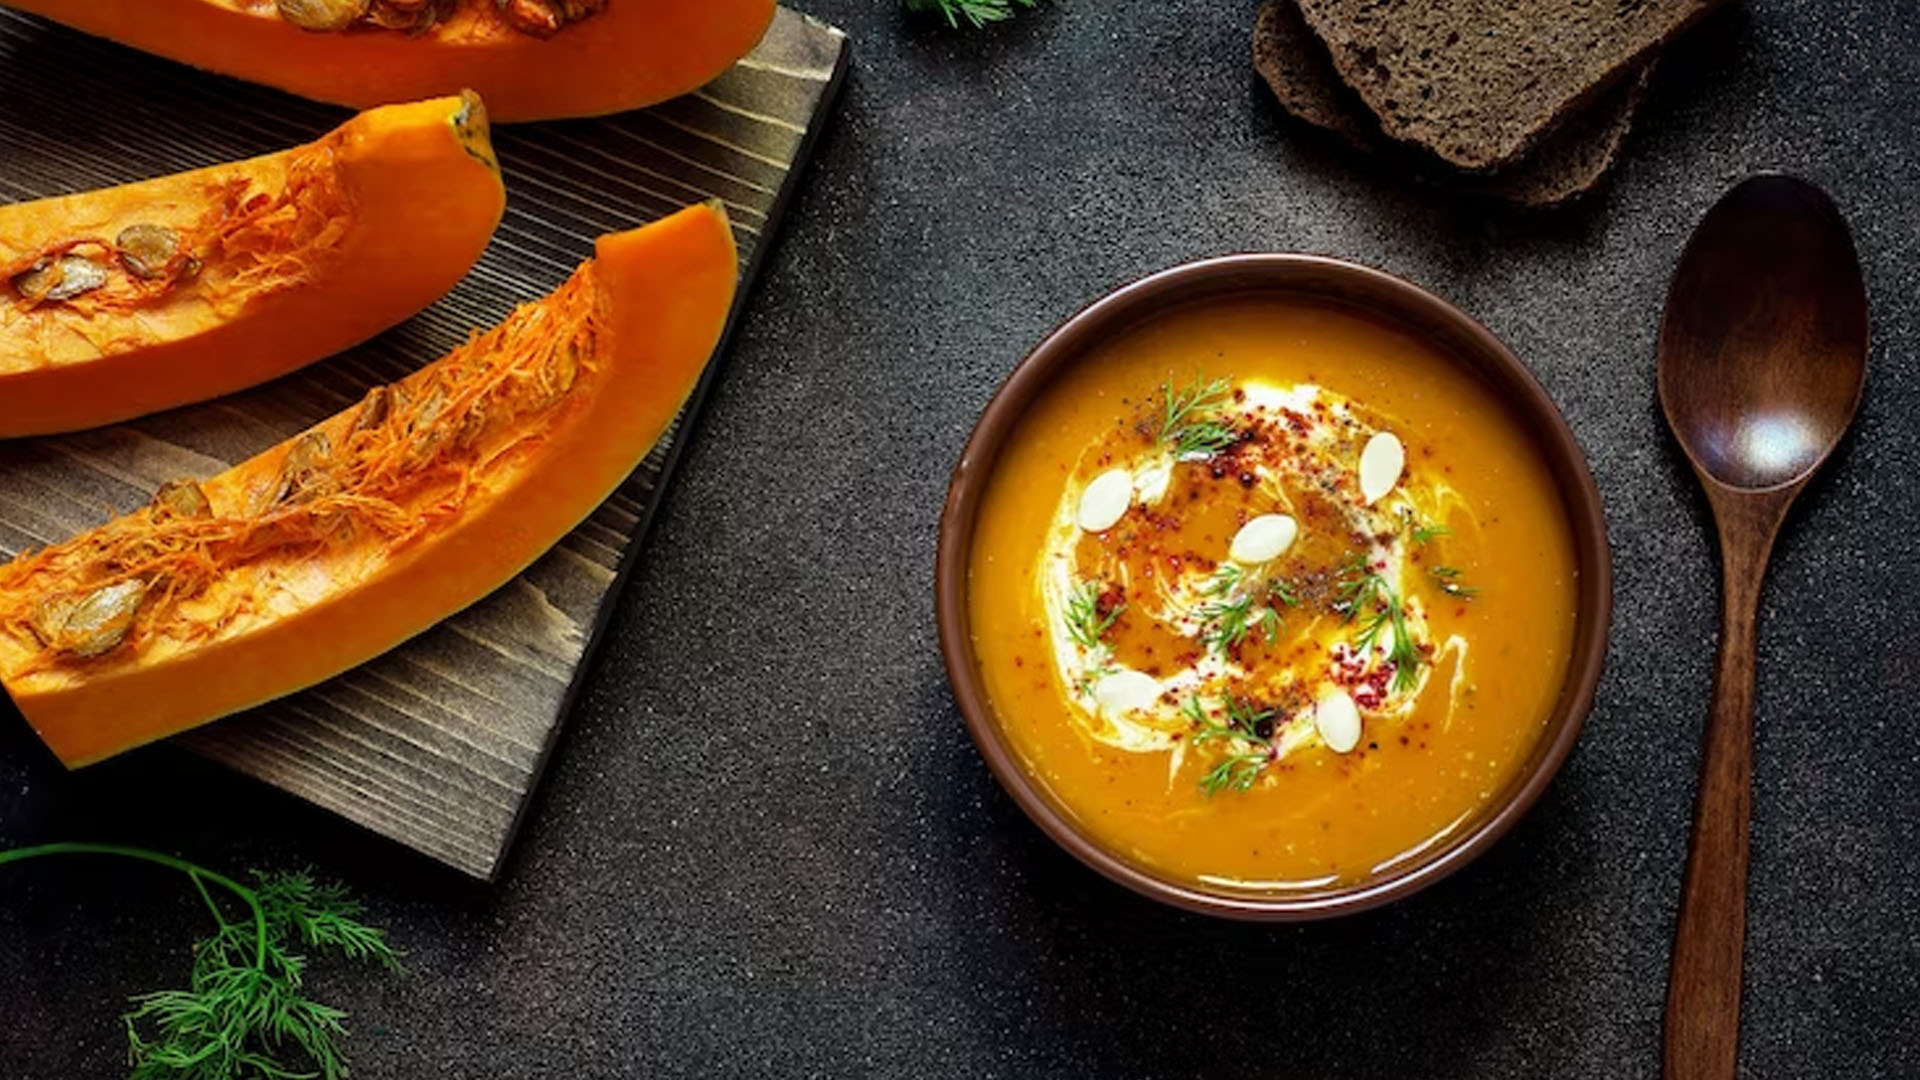 What Are The Health Benefits of Butternut Squash Soup?